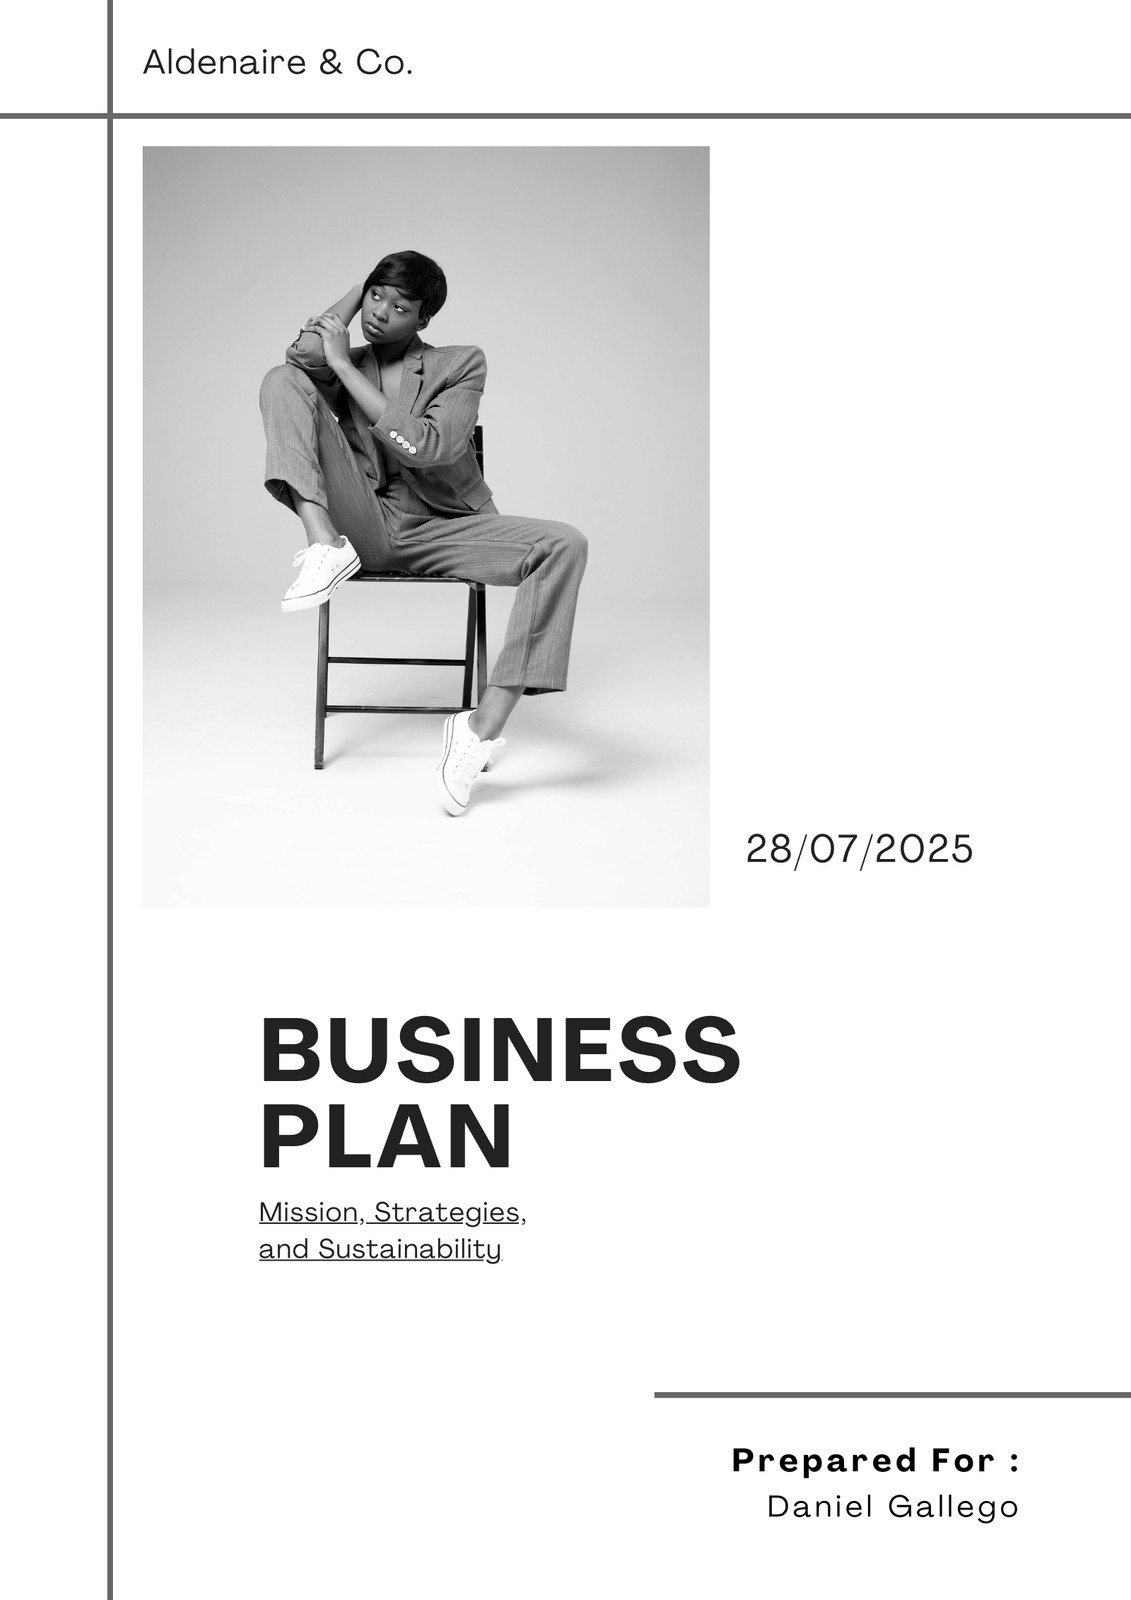 Canva Grey Minimalist Business Plan Cover Page 2BDGR9bIiMI 